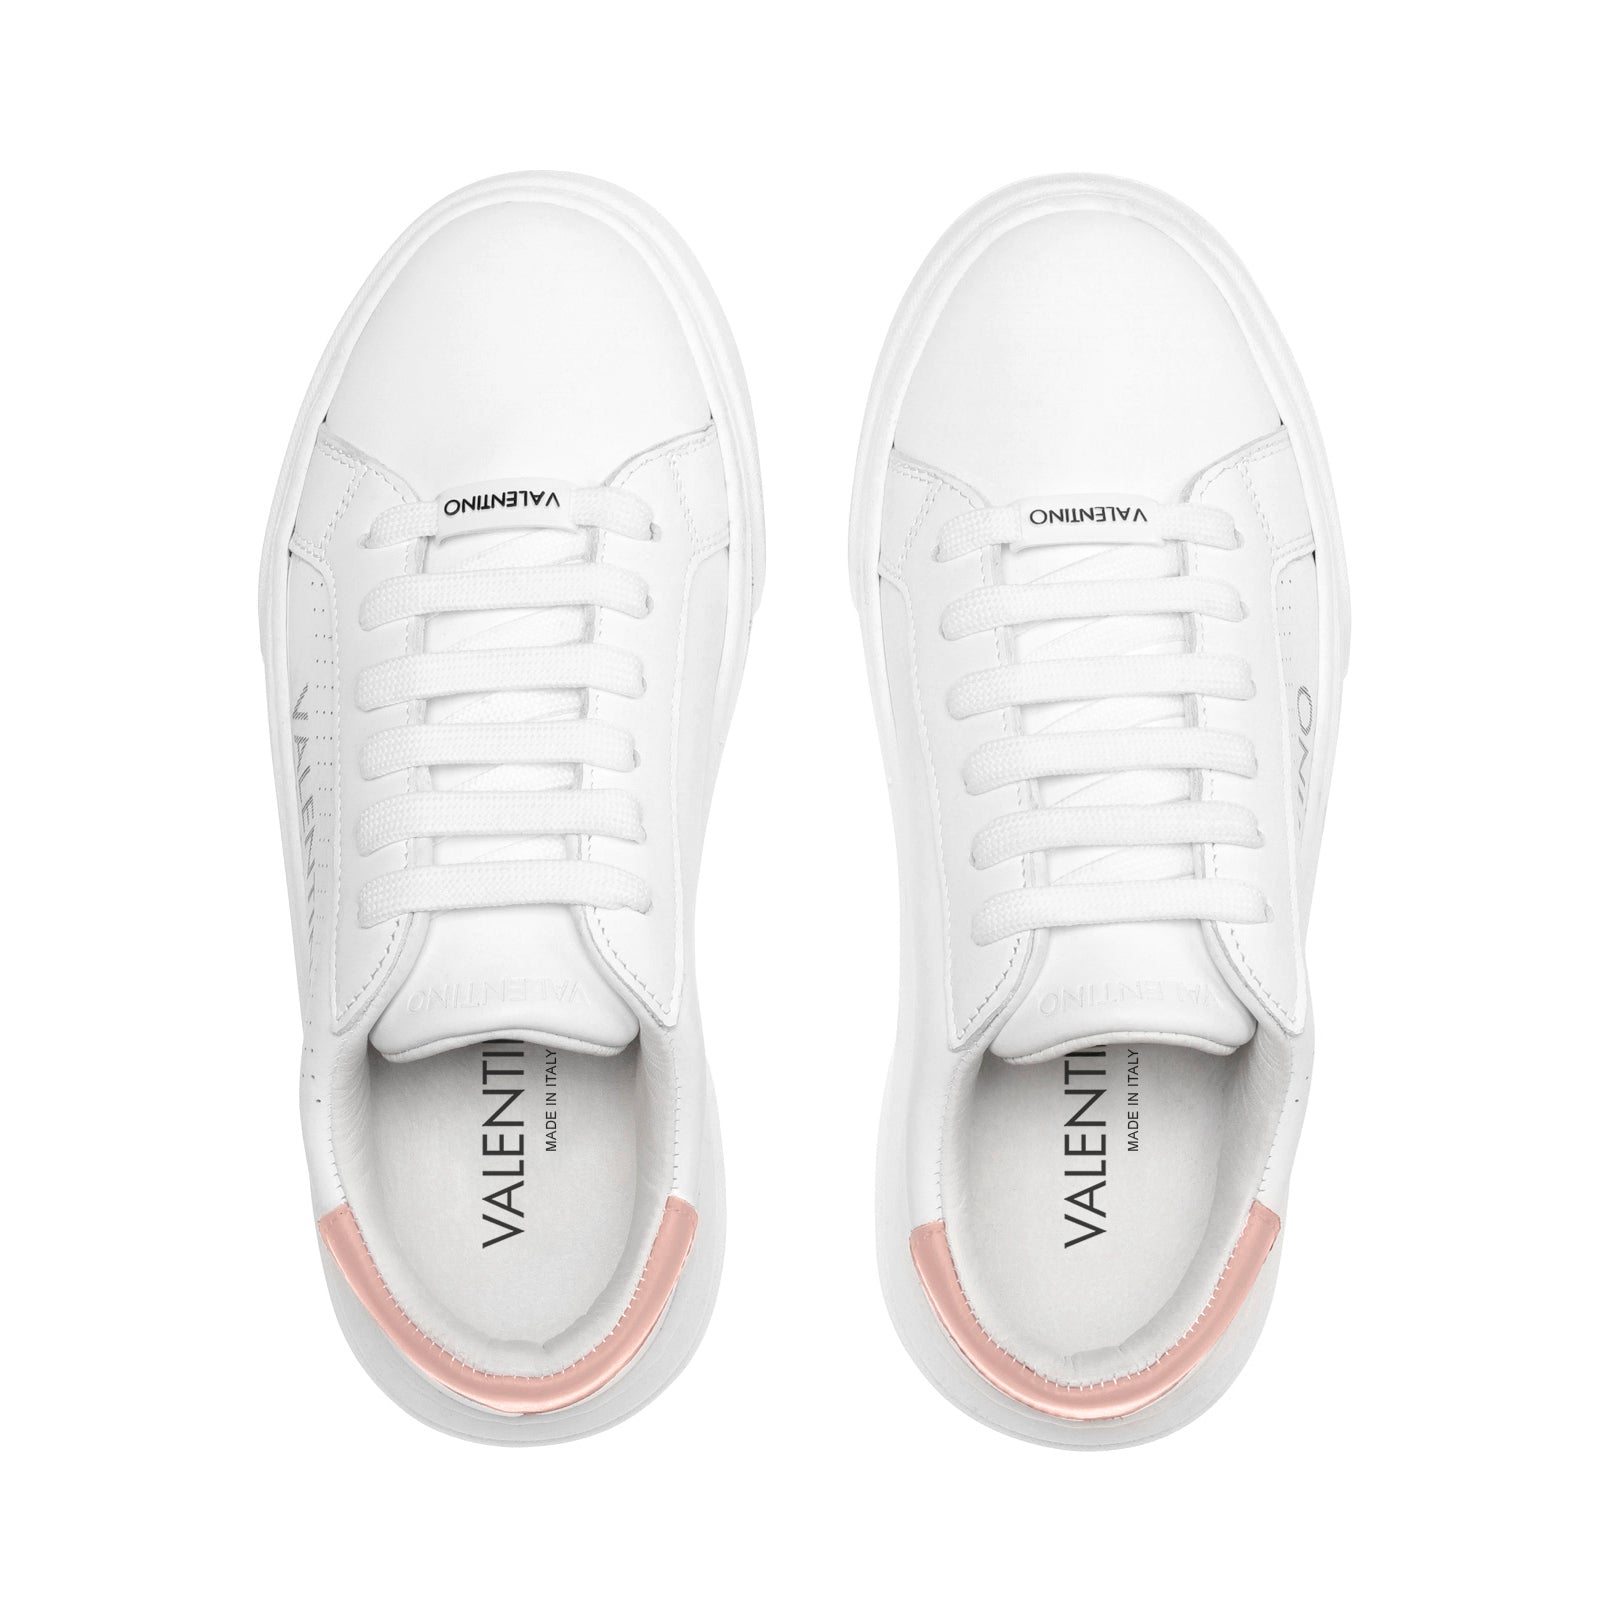 eftertænksom appel anklageren Valentino Sneakers Low-Top for Women in White Calf and Pink Detail –  Valentino Shoes